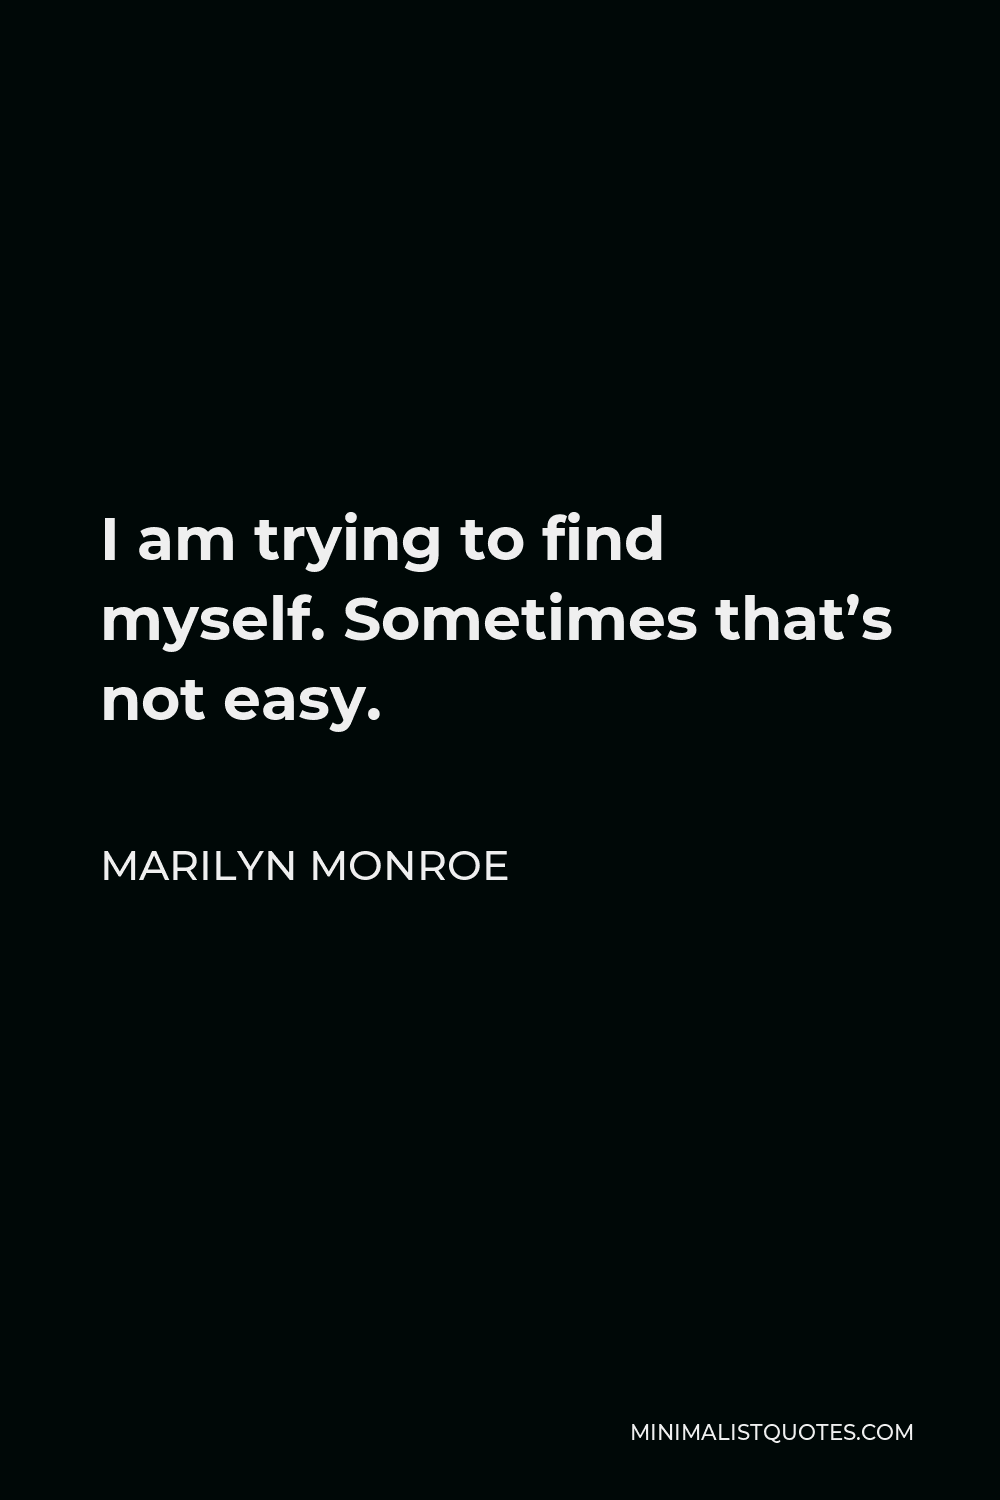 Marilyn Monroe Quote - I am trying to find myself. Sometimes that’s not easy.